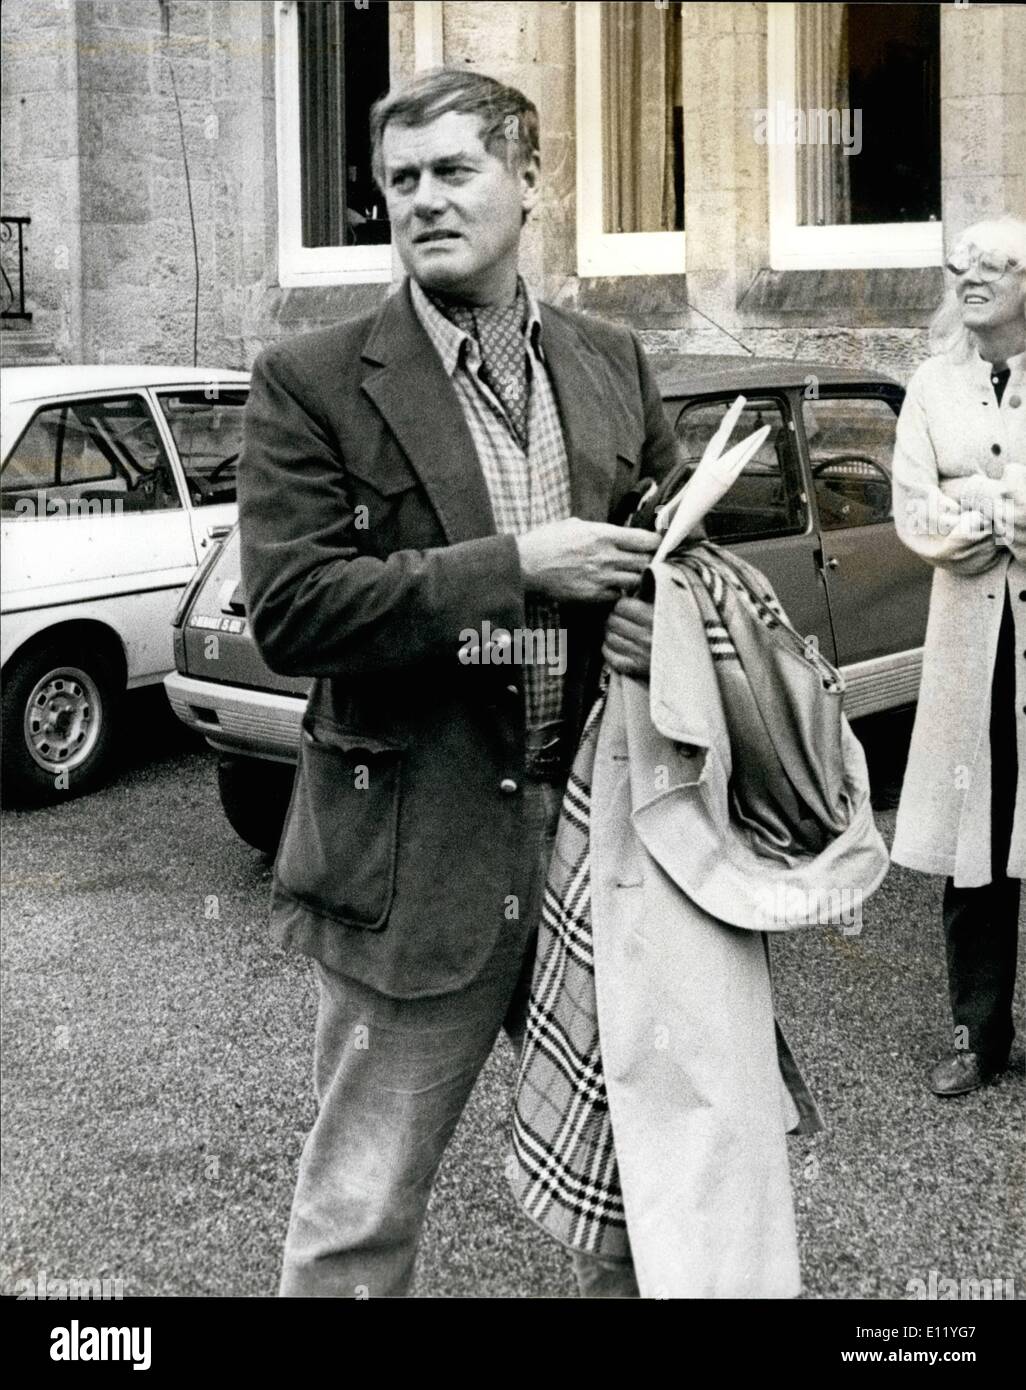 Apr. 04, 1981 - ''Jr'' Mourns Whilst on Holiday in Scotland: American actor Larry Hagman, better known as ''JR'' of TV's ''Dallas'' series, has been holidaying in Scotland with his wife Maj. Here he is seen leaving the Newton Hotel, Nairn, shortly after hearing of the death of the actor who plays his screen father, Jim Davis. The Newton Hotel used to be a favourite haunt of Charles Chaplin. Photo shows Larry Hagman leaving the Newton Hotel. Stock Photo